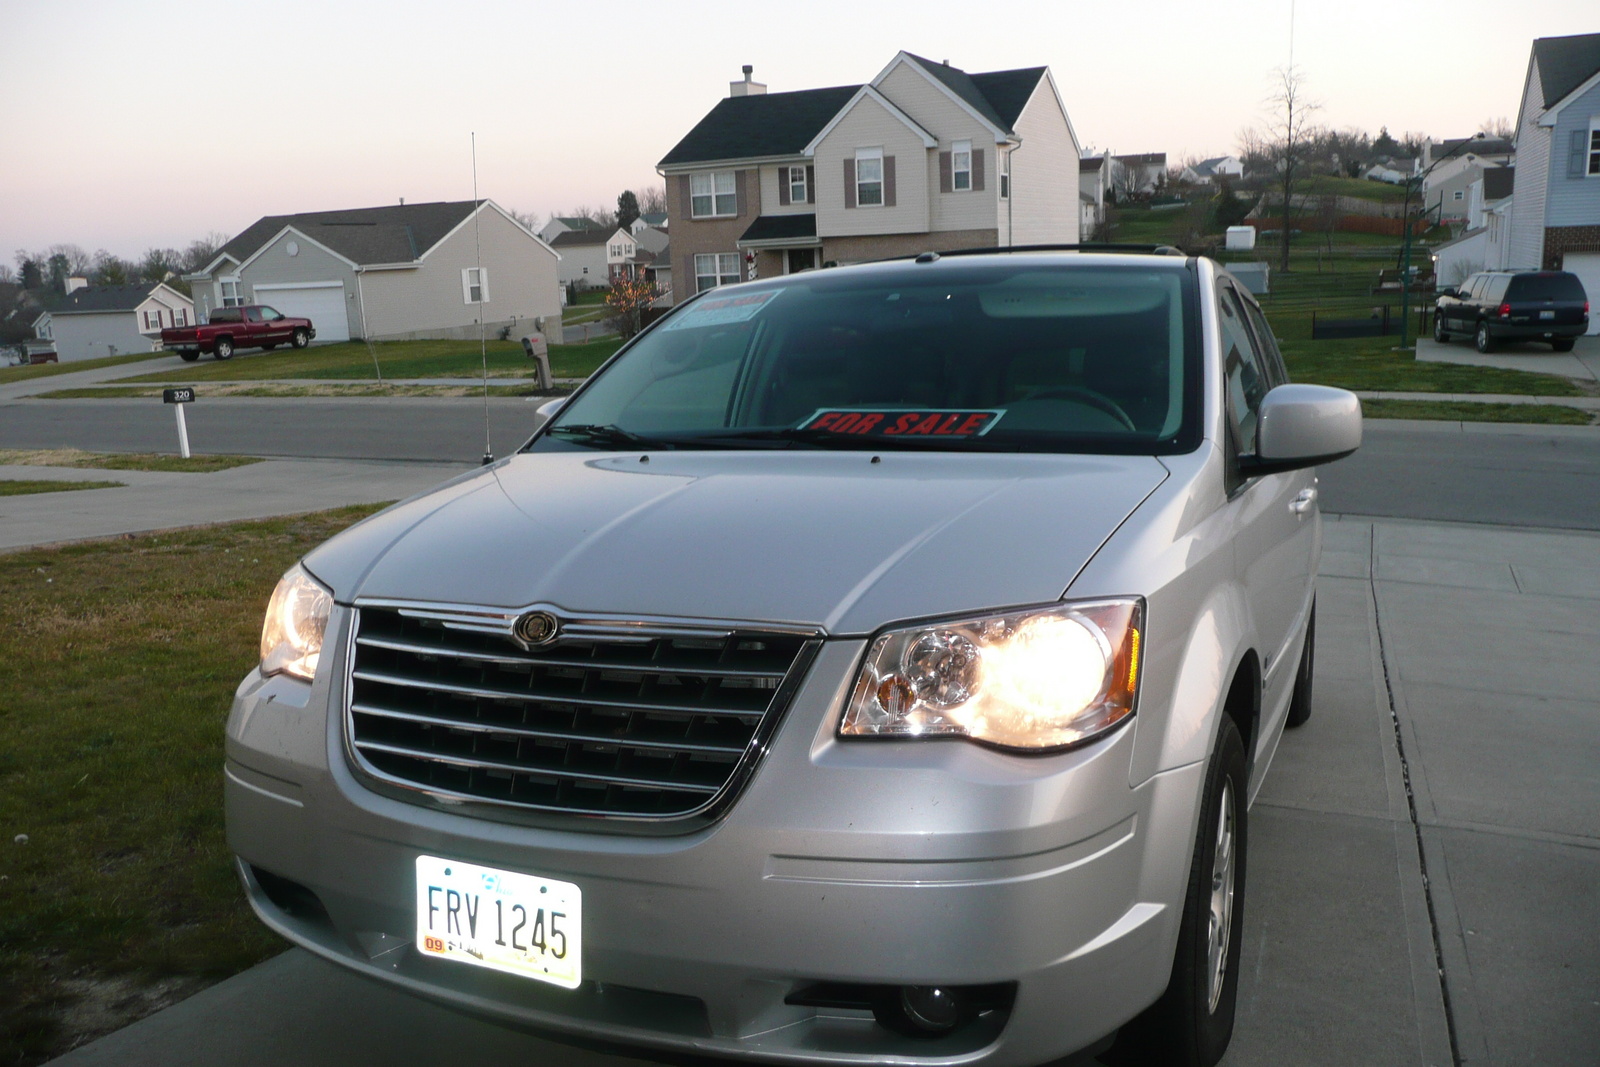 2008 Chrysler town and country touring consumer reviews #1